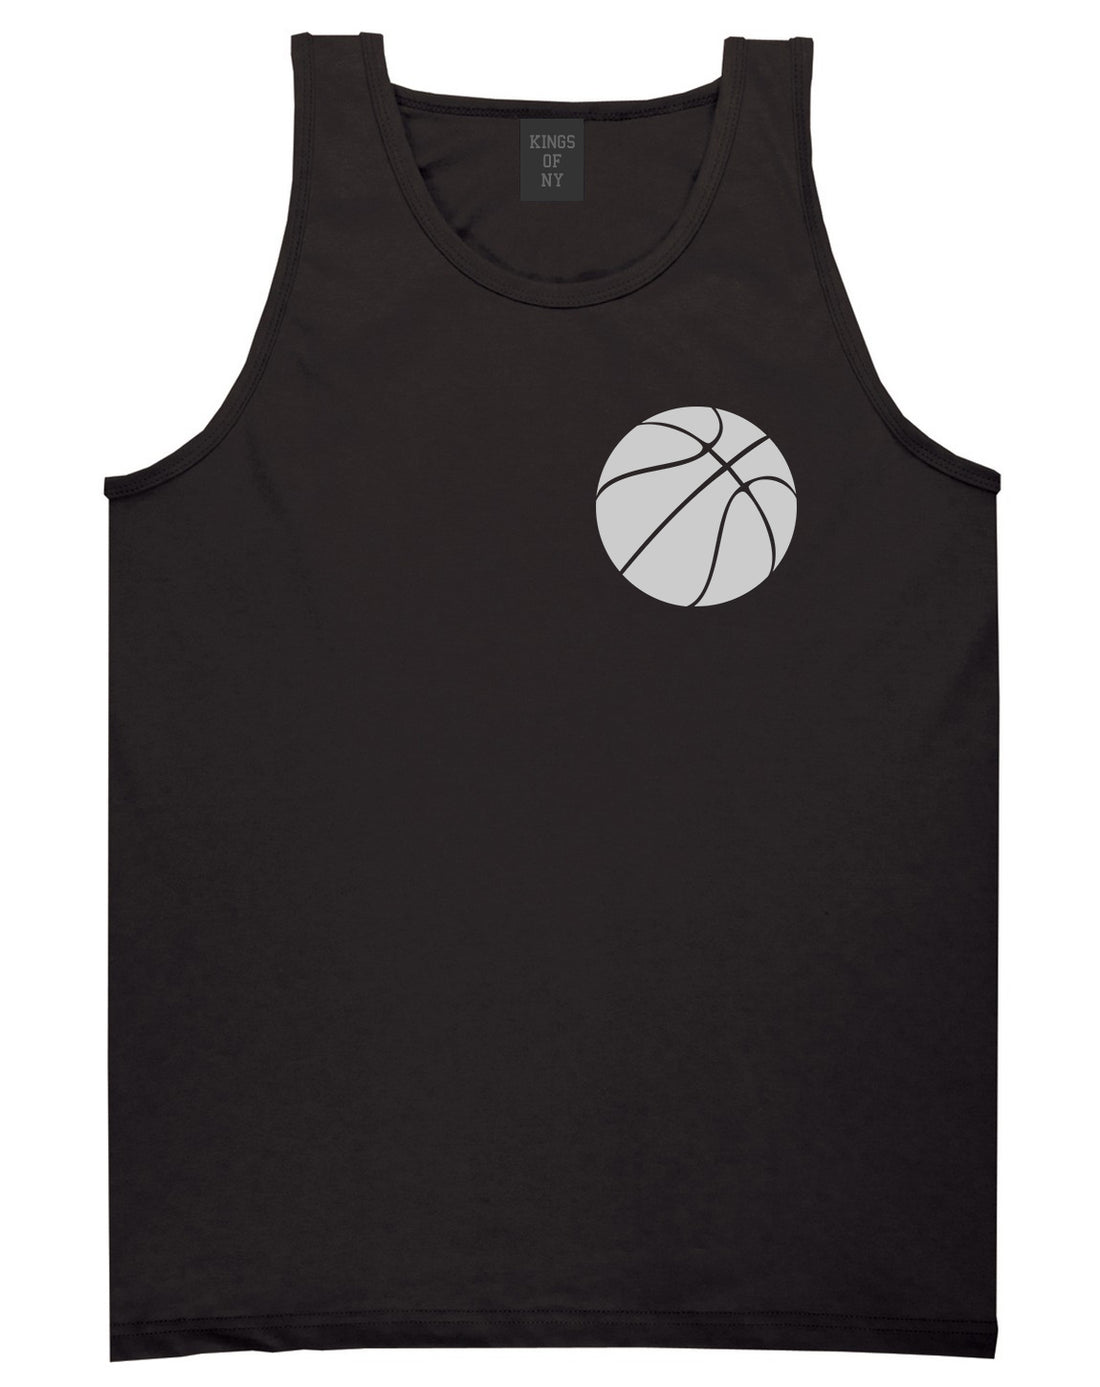 Basketball Logo Chest Black Tank Top Shirt by Kings Of NY